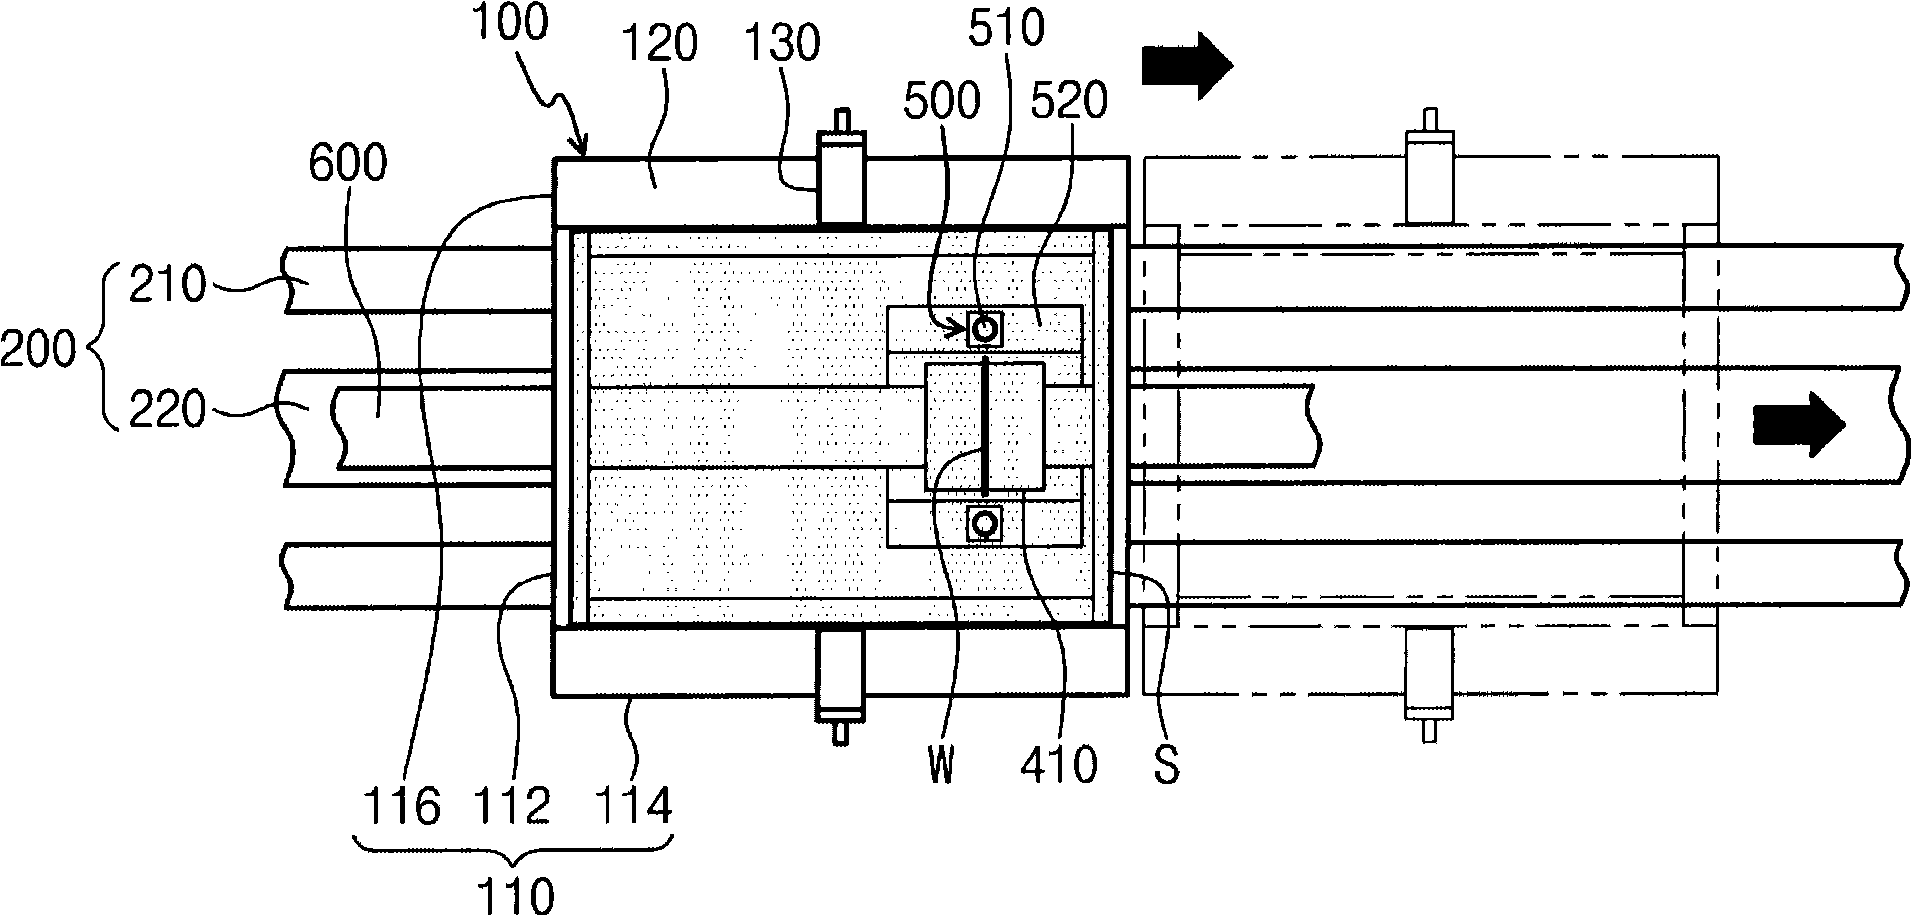 Optical inspection device